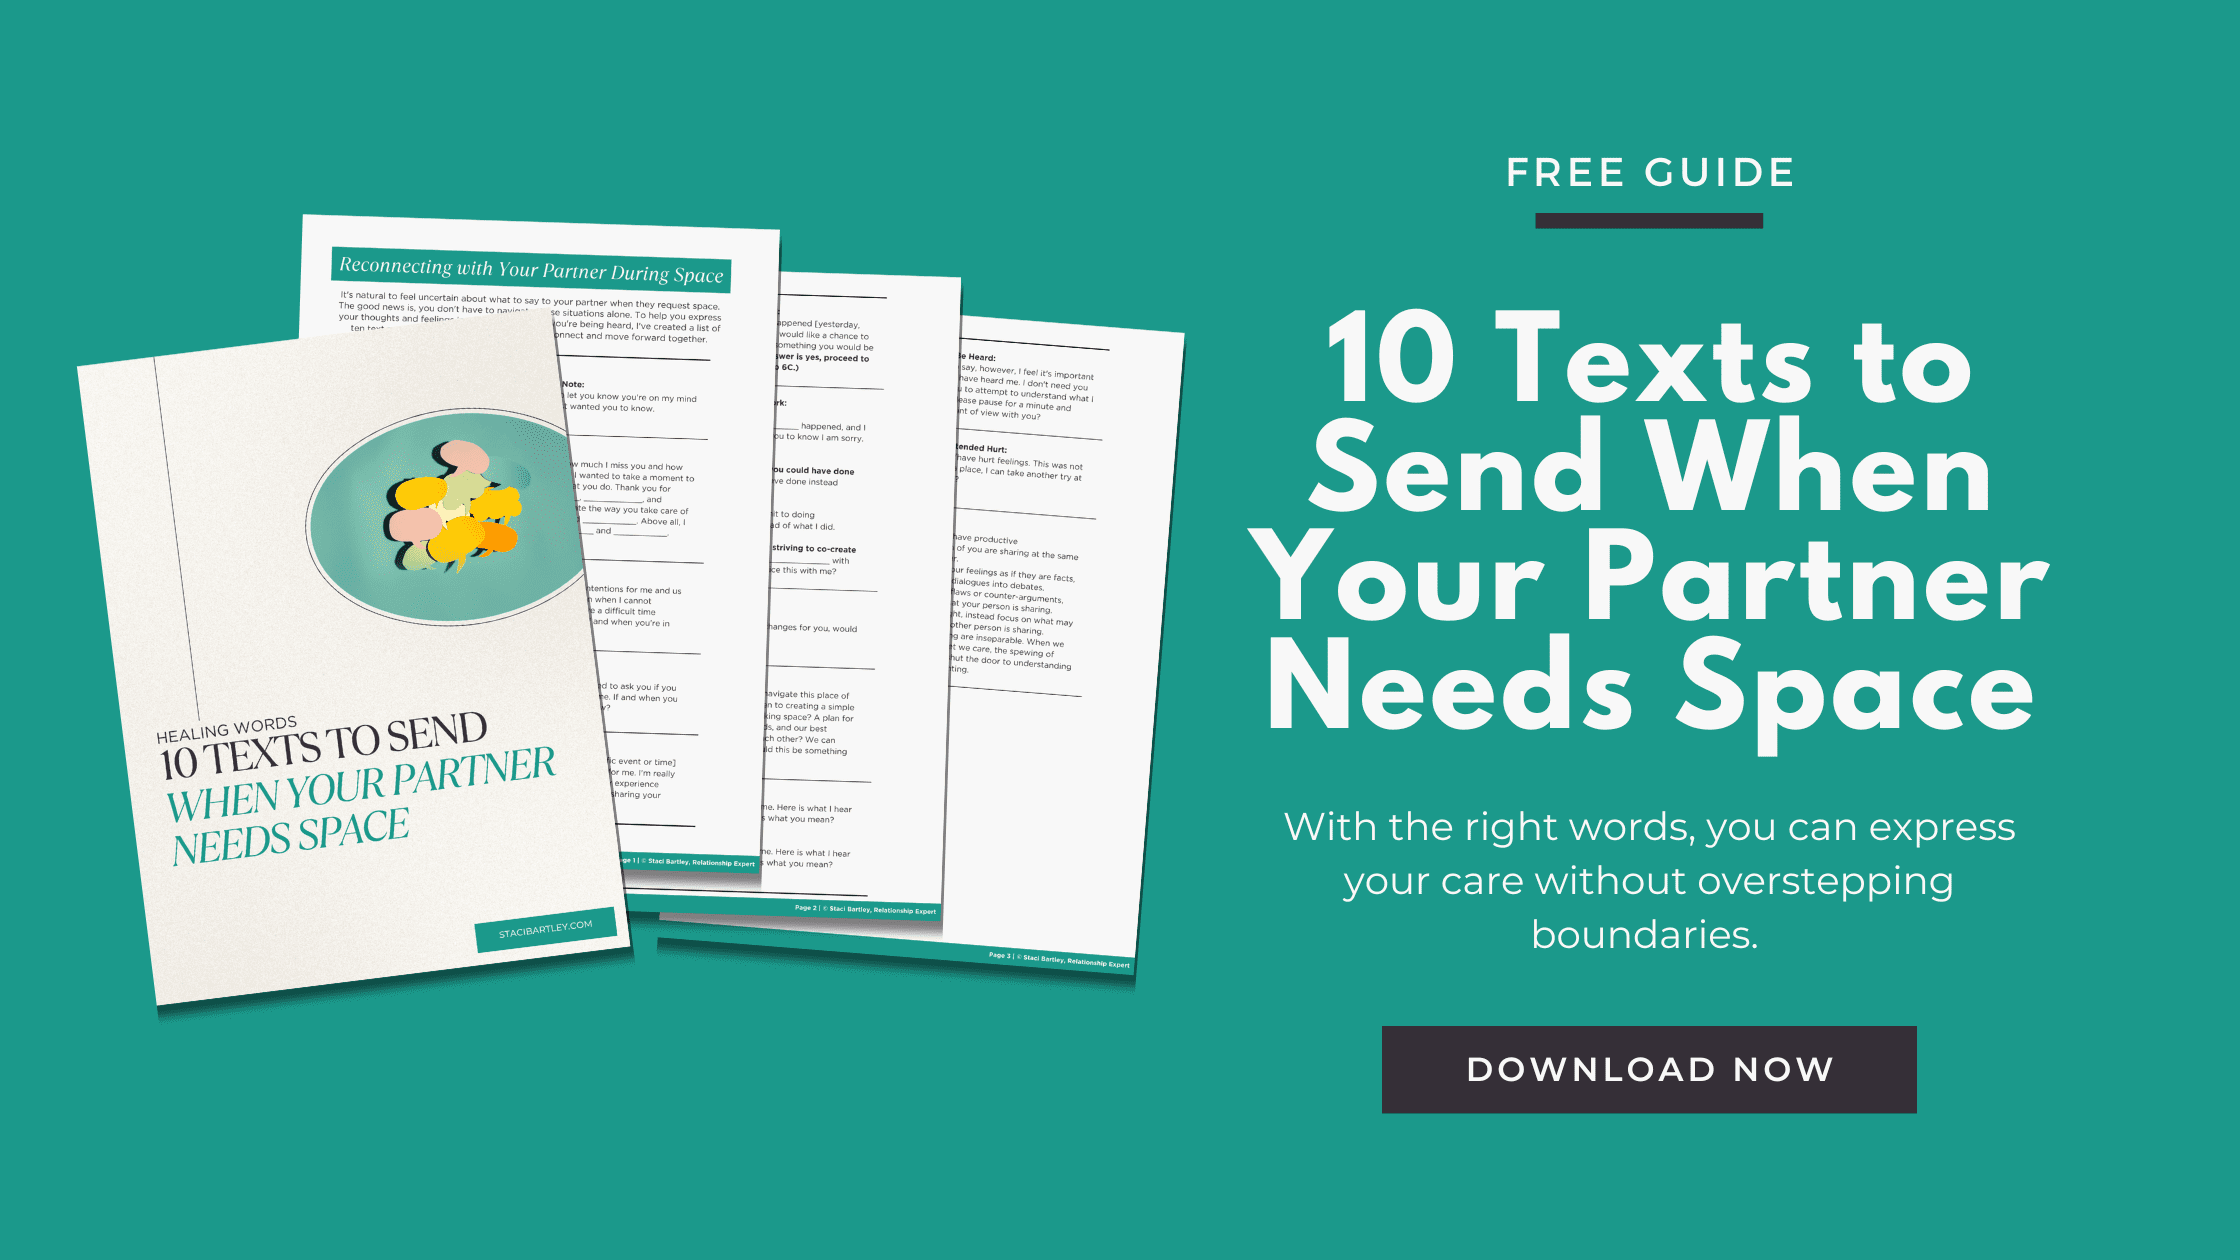 10 Texts to Send When Your Partner Needs Space